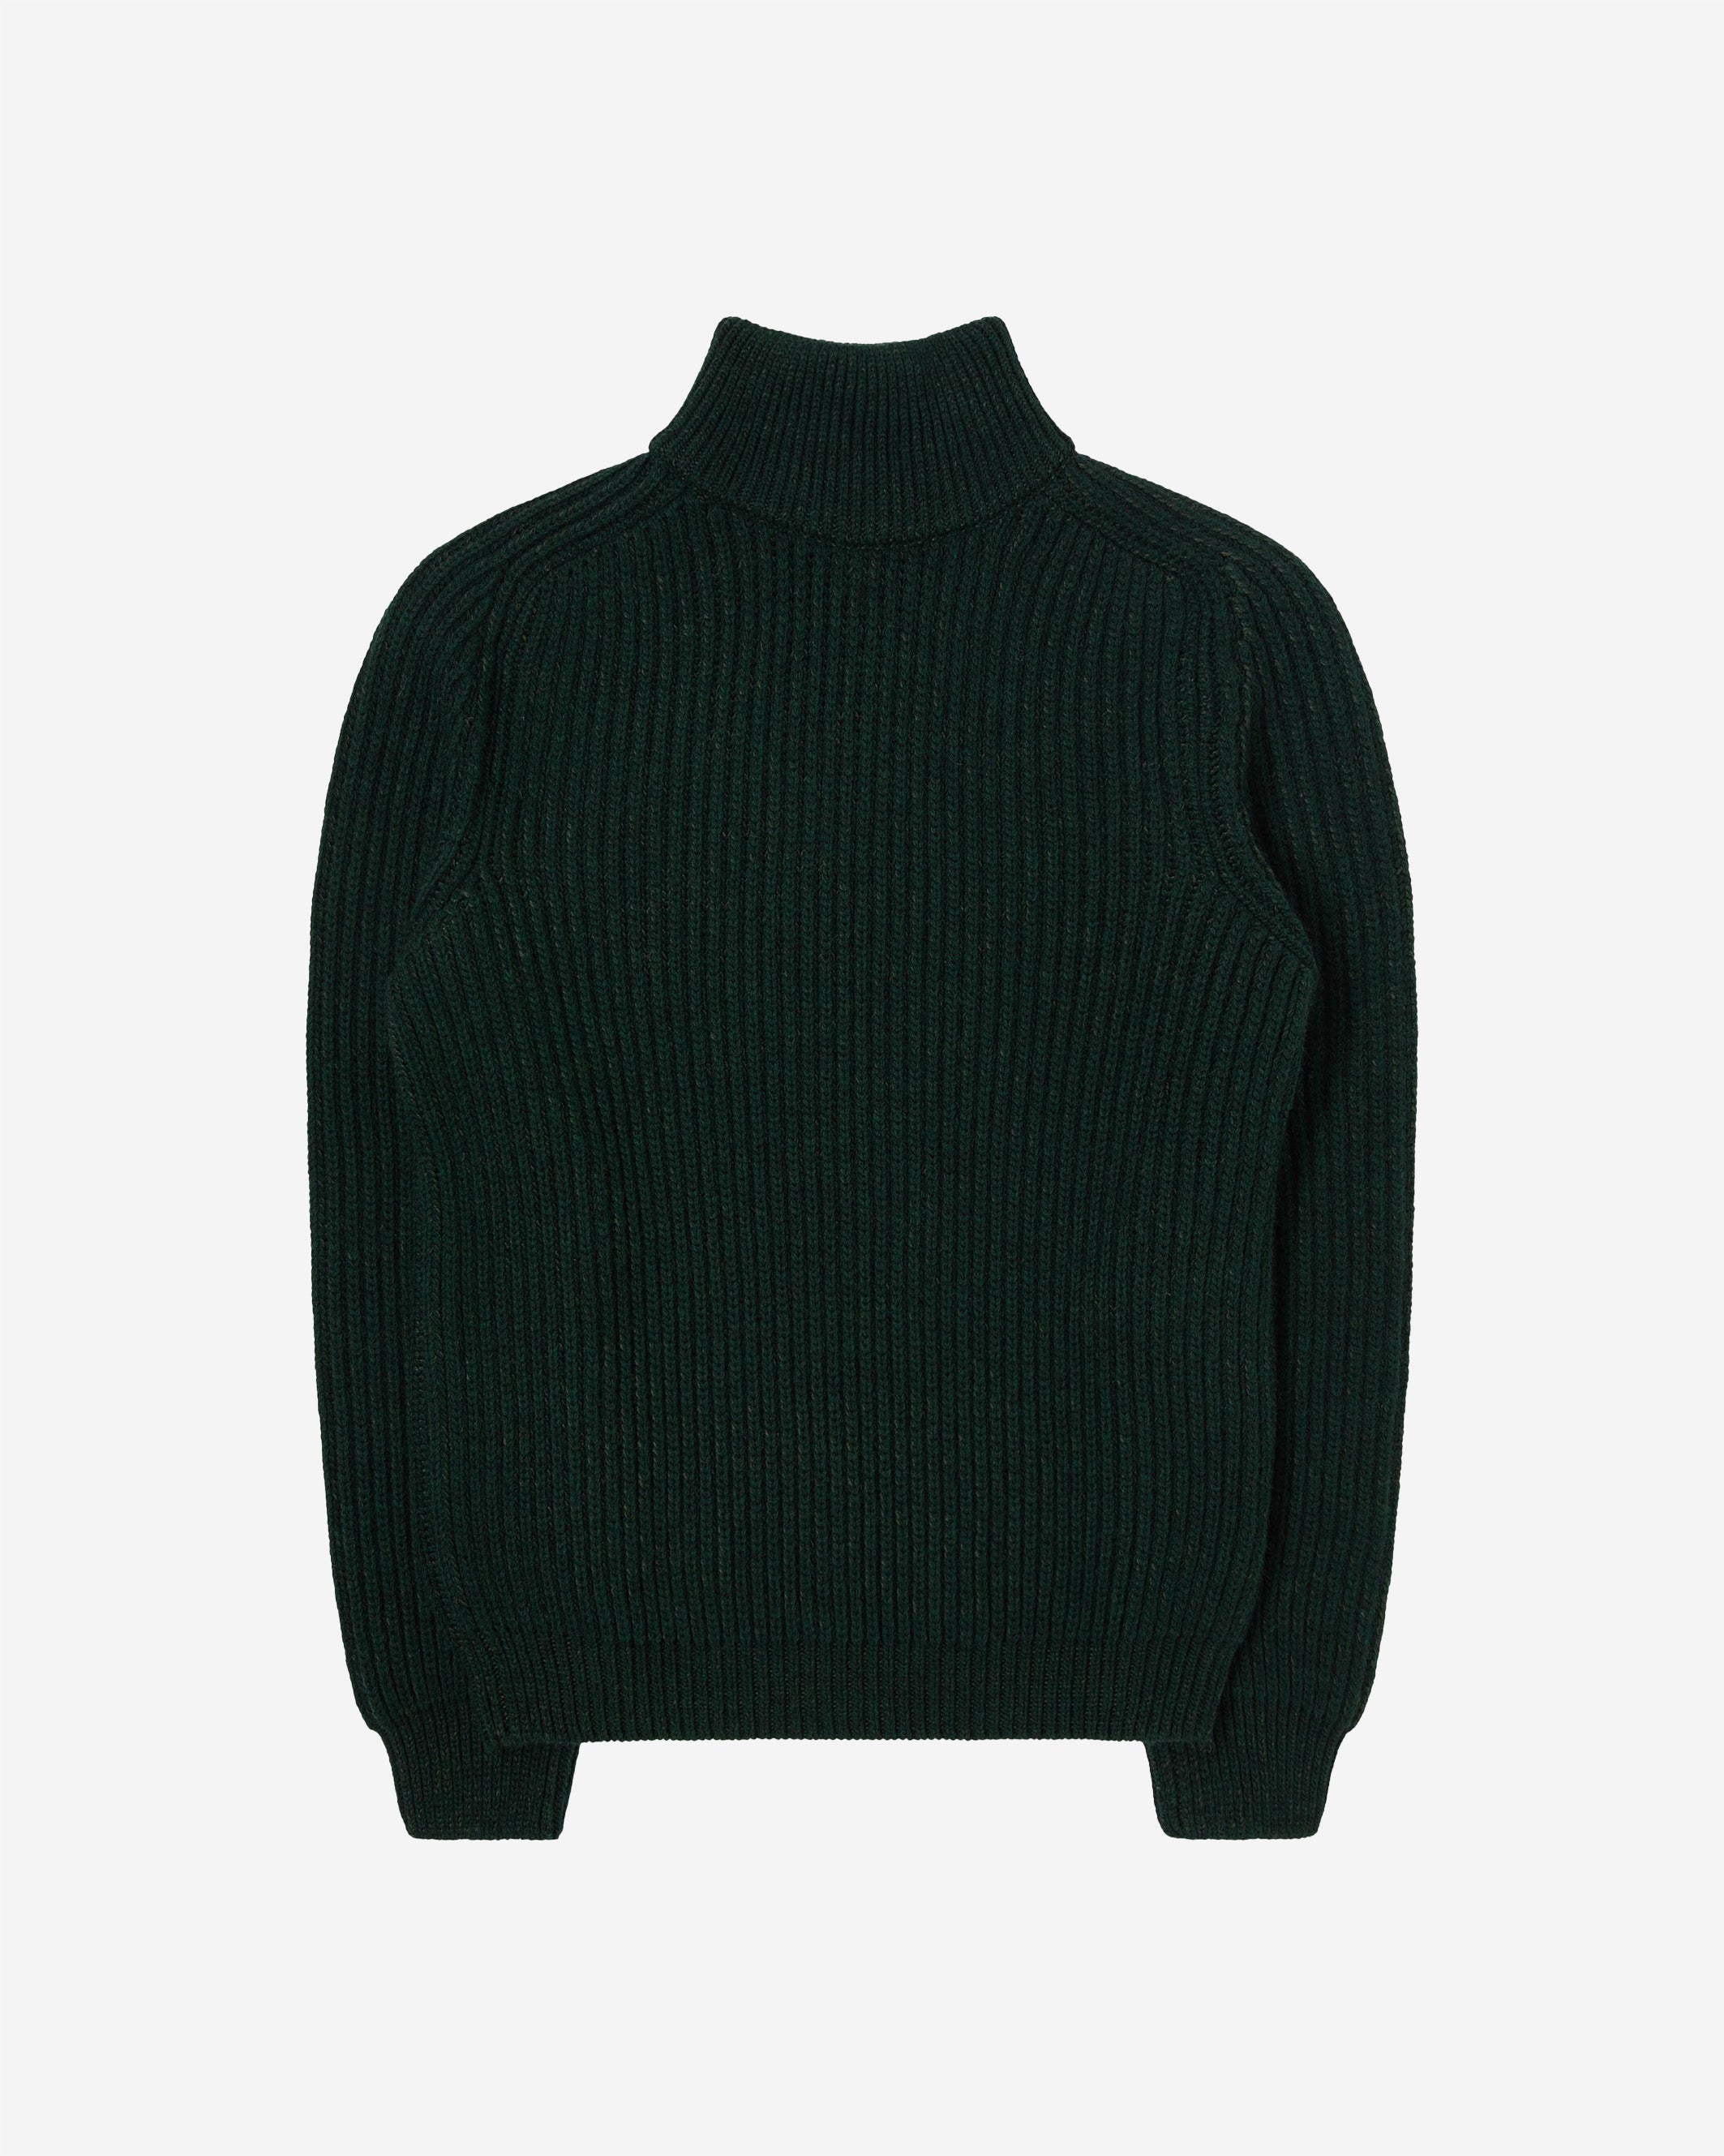 The EDWIN Roni High Collar Sweater is a green coloured, oversized fitting mixed Yarn Knitted Sweater. 50% Acrylic / 34% blended Wool / 10% Polyamid / 6% Alpaca Oversized Fit Full Cardigan Knit